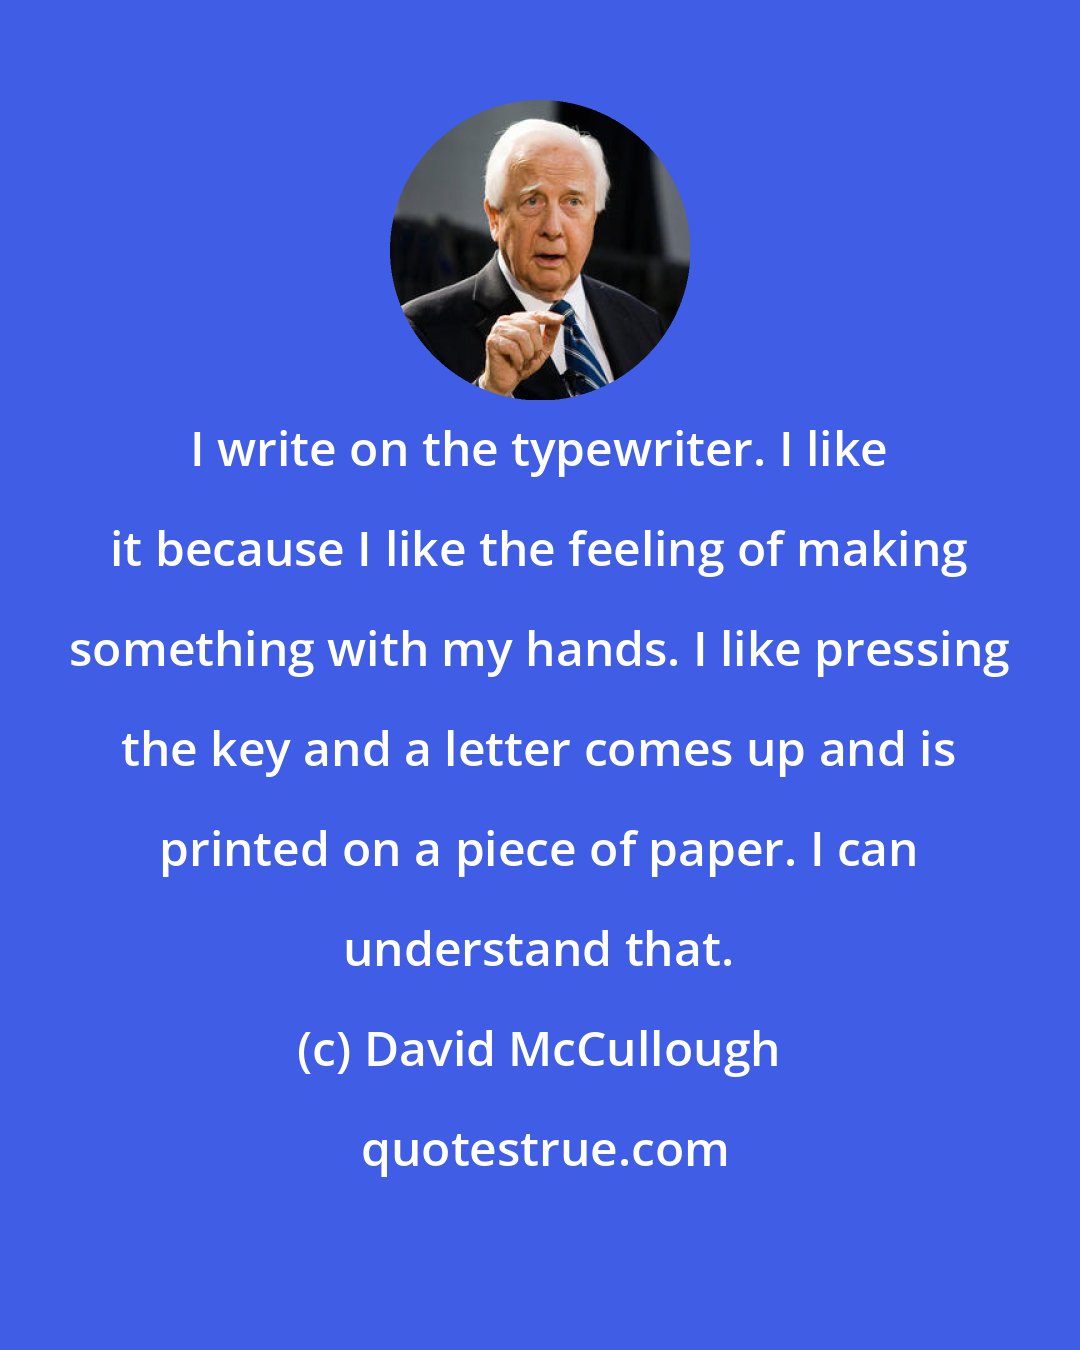 David McCullough: I write on the typewriter. I like it because I like the feeling of making something with my hands. I like pressing the key and a letter comes up and is printed on a piece of paper. I can understand that.